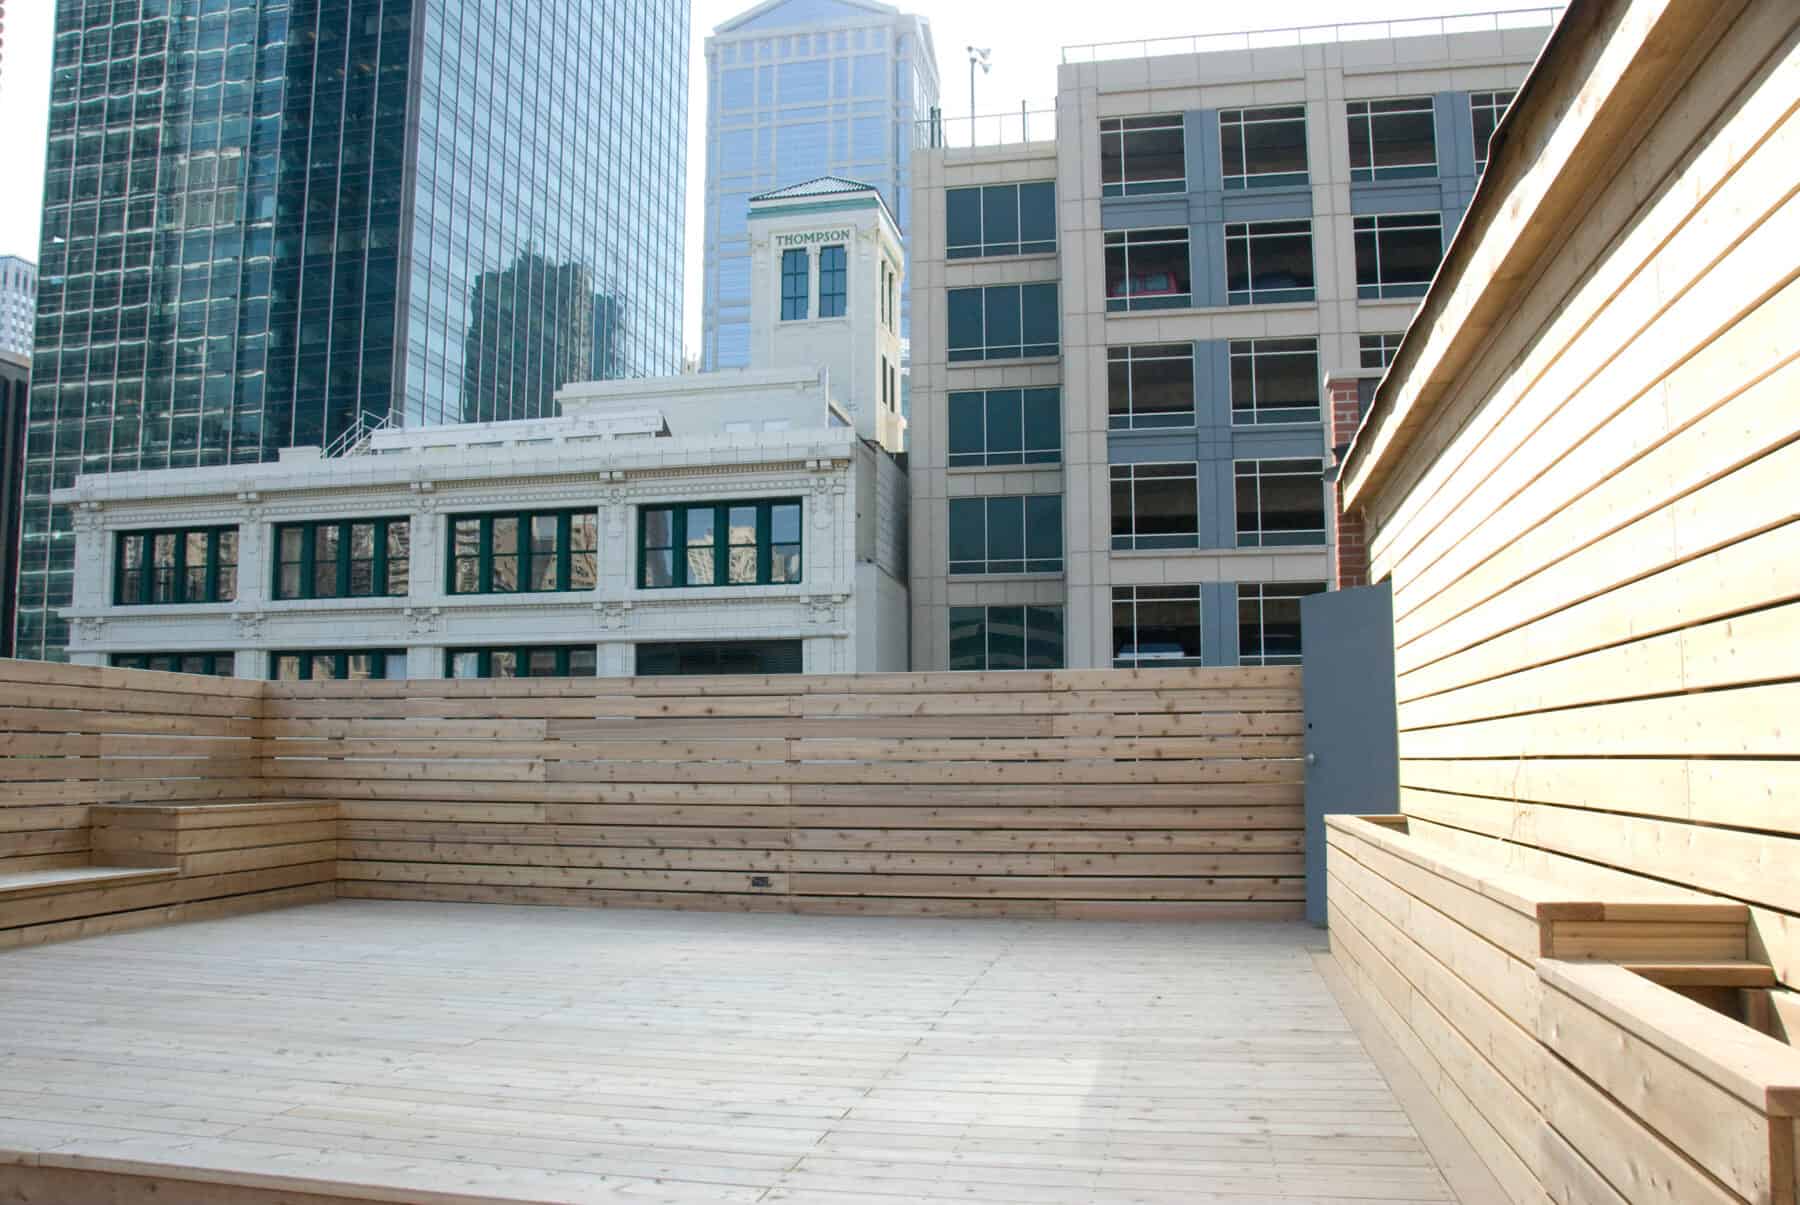 Custom Rooftop Deck with Wood Plant boxes, Fence and Walkways from Construction Specialty Projects by Commercial Builder & General Contractor Structural Enterprises